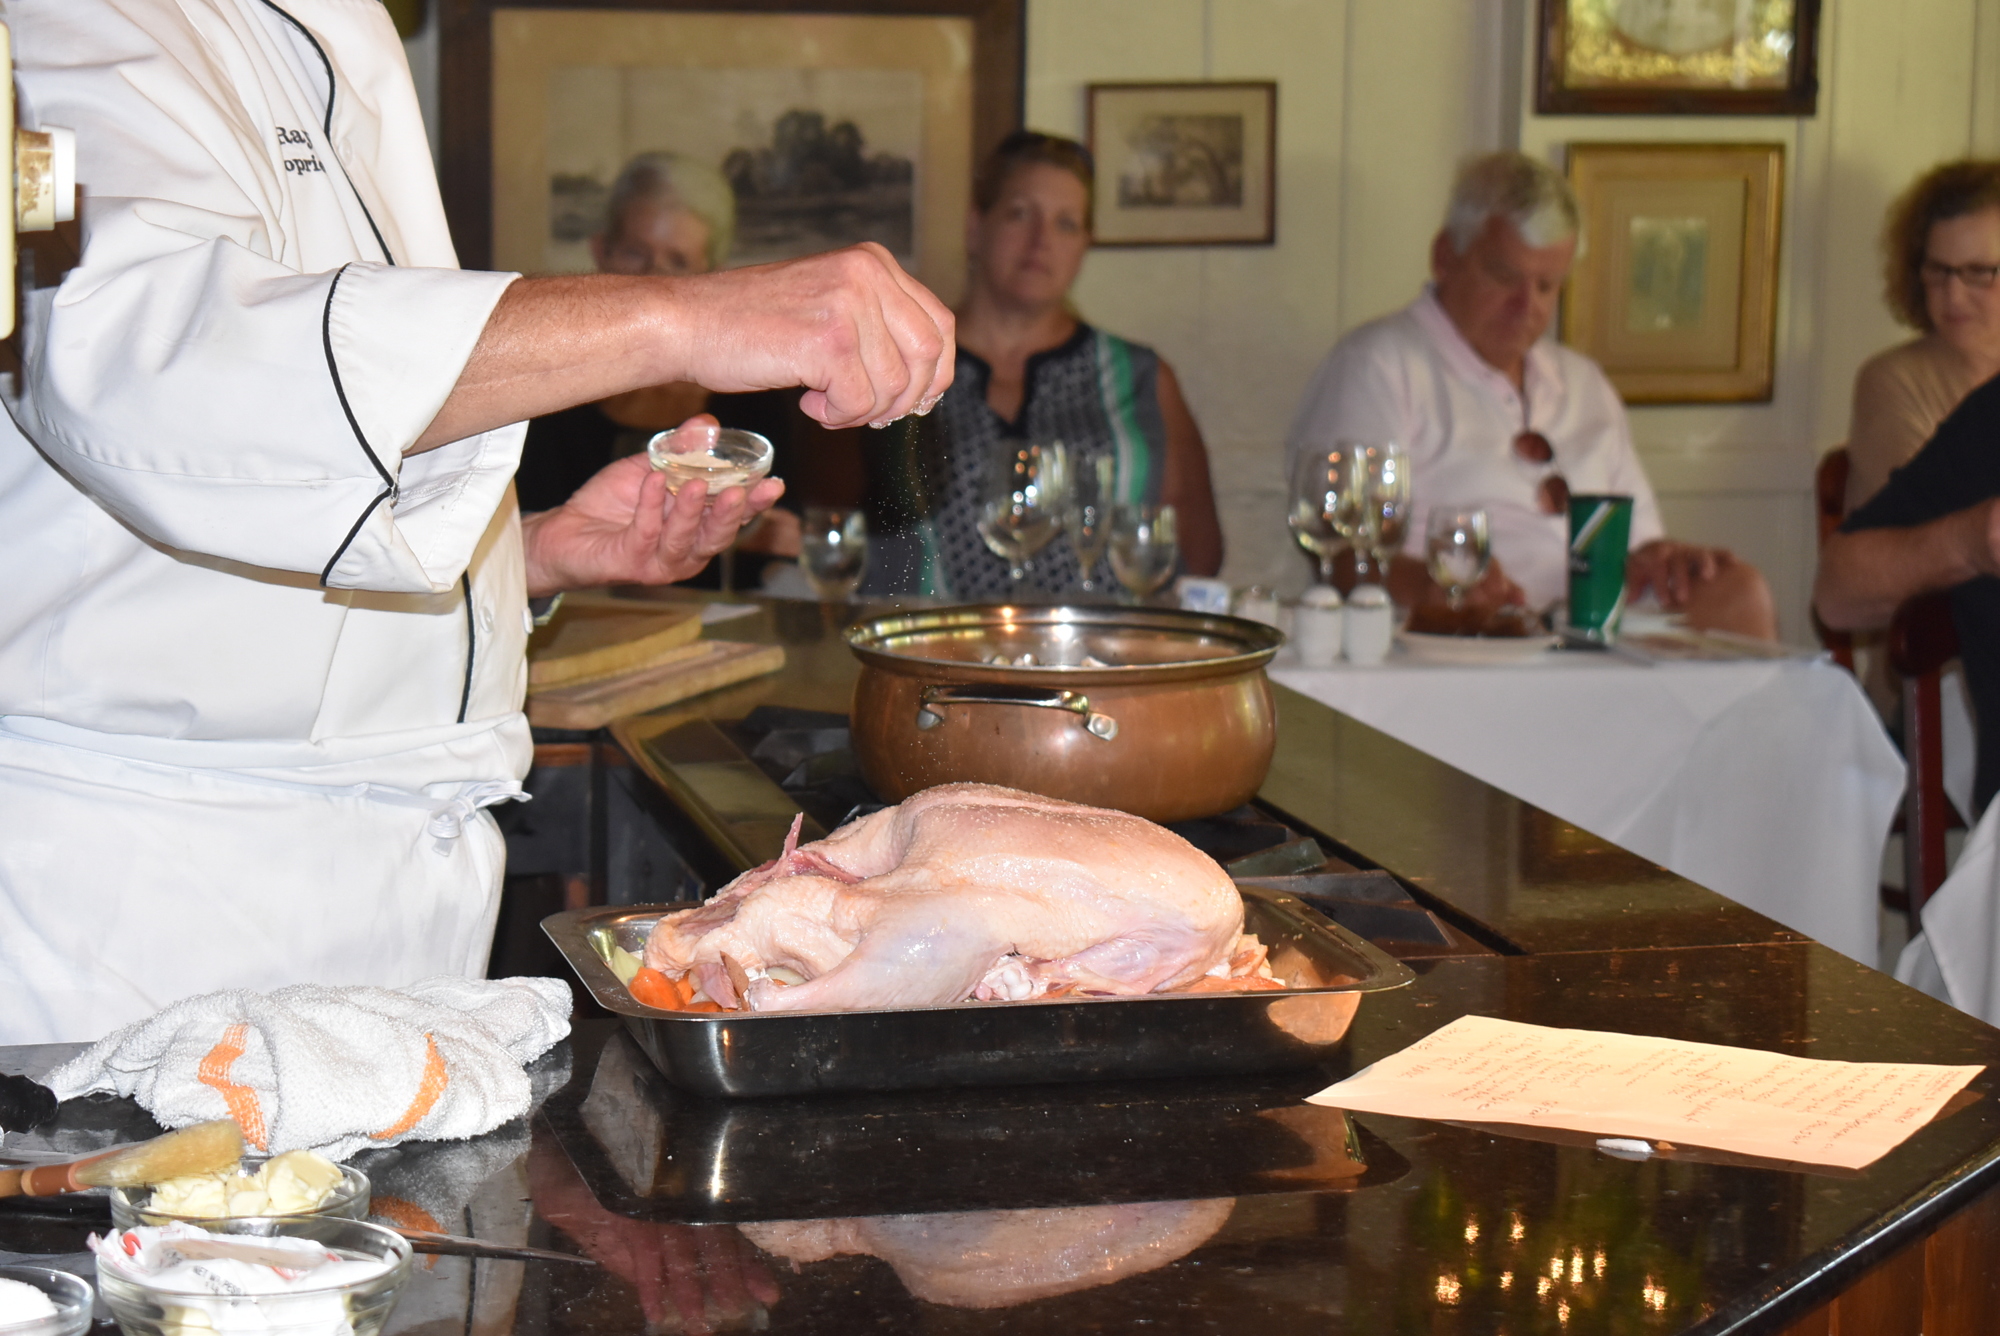 Though the restaurant offers a turkey special, you can still get Euphemia Haye's fabulous duck on Thanksgiving Day.